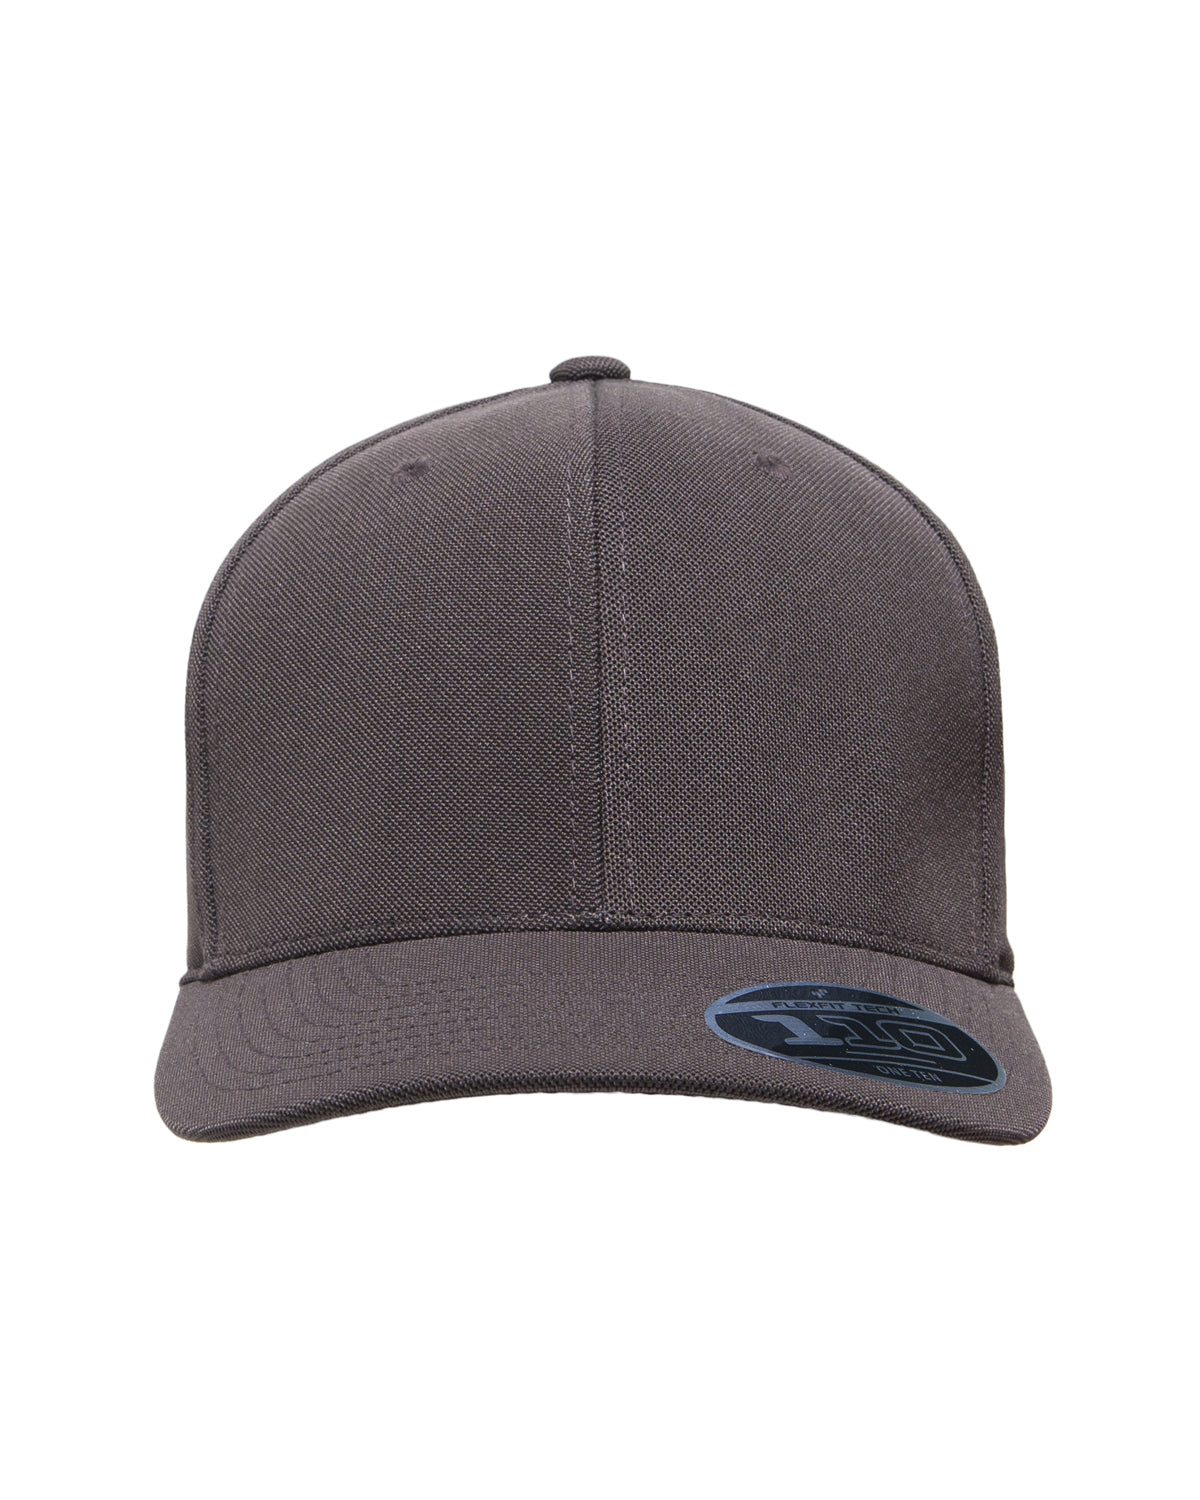 Team 365 ATB100 Mens Cool & Dry Moisture Wicking Adjustable Hat Brown Front